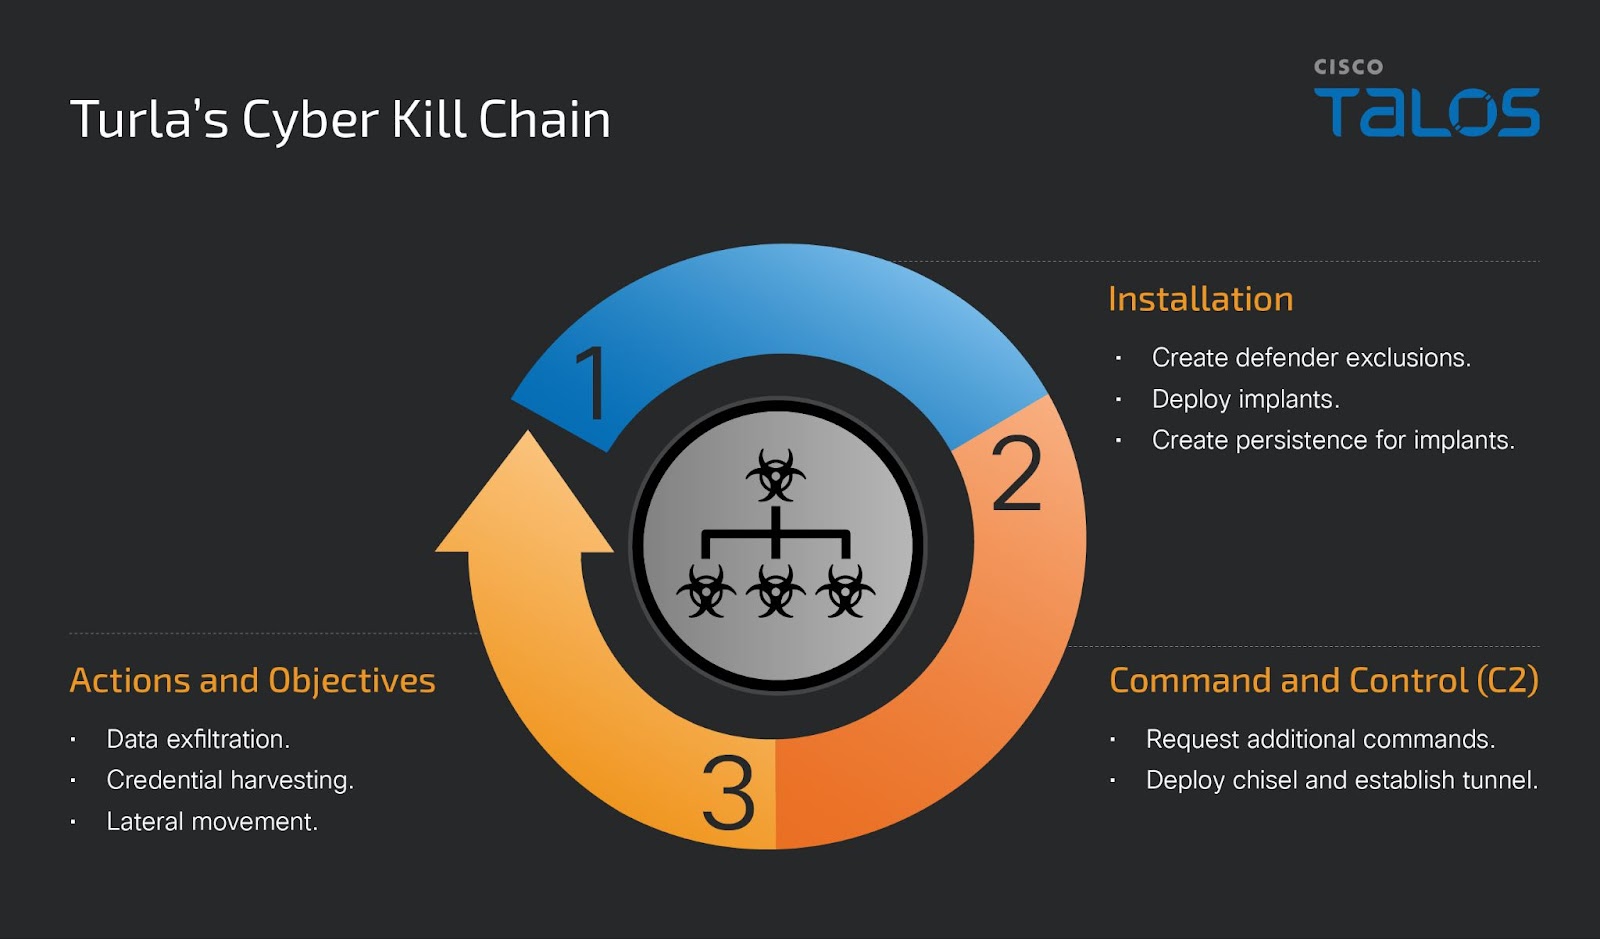 New details on TinyTurla’s post-compromise activity reveal full kill chain